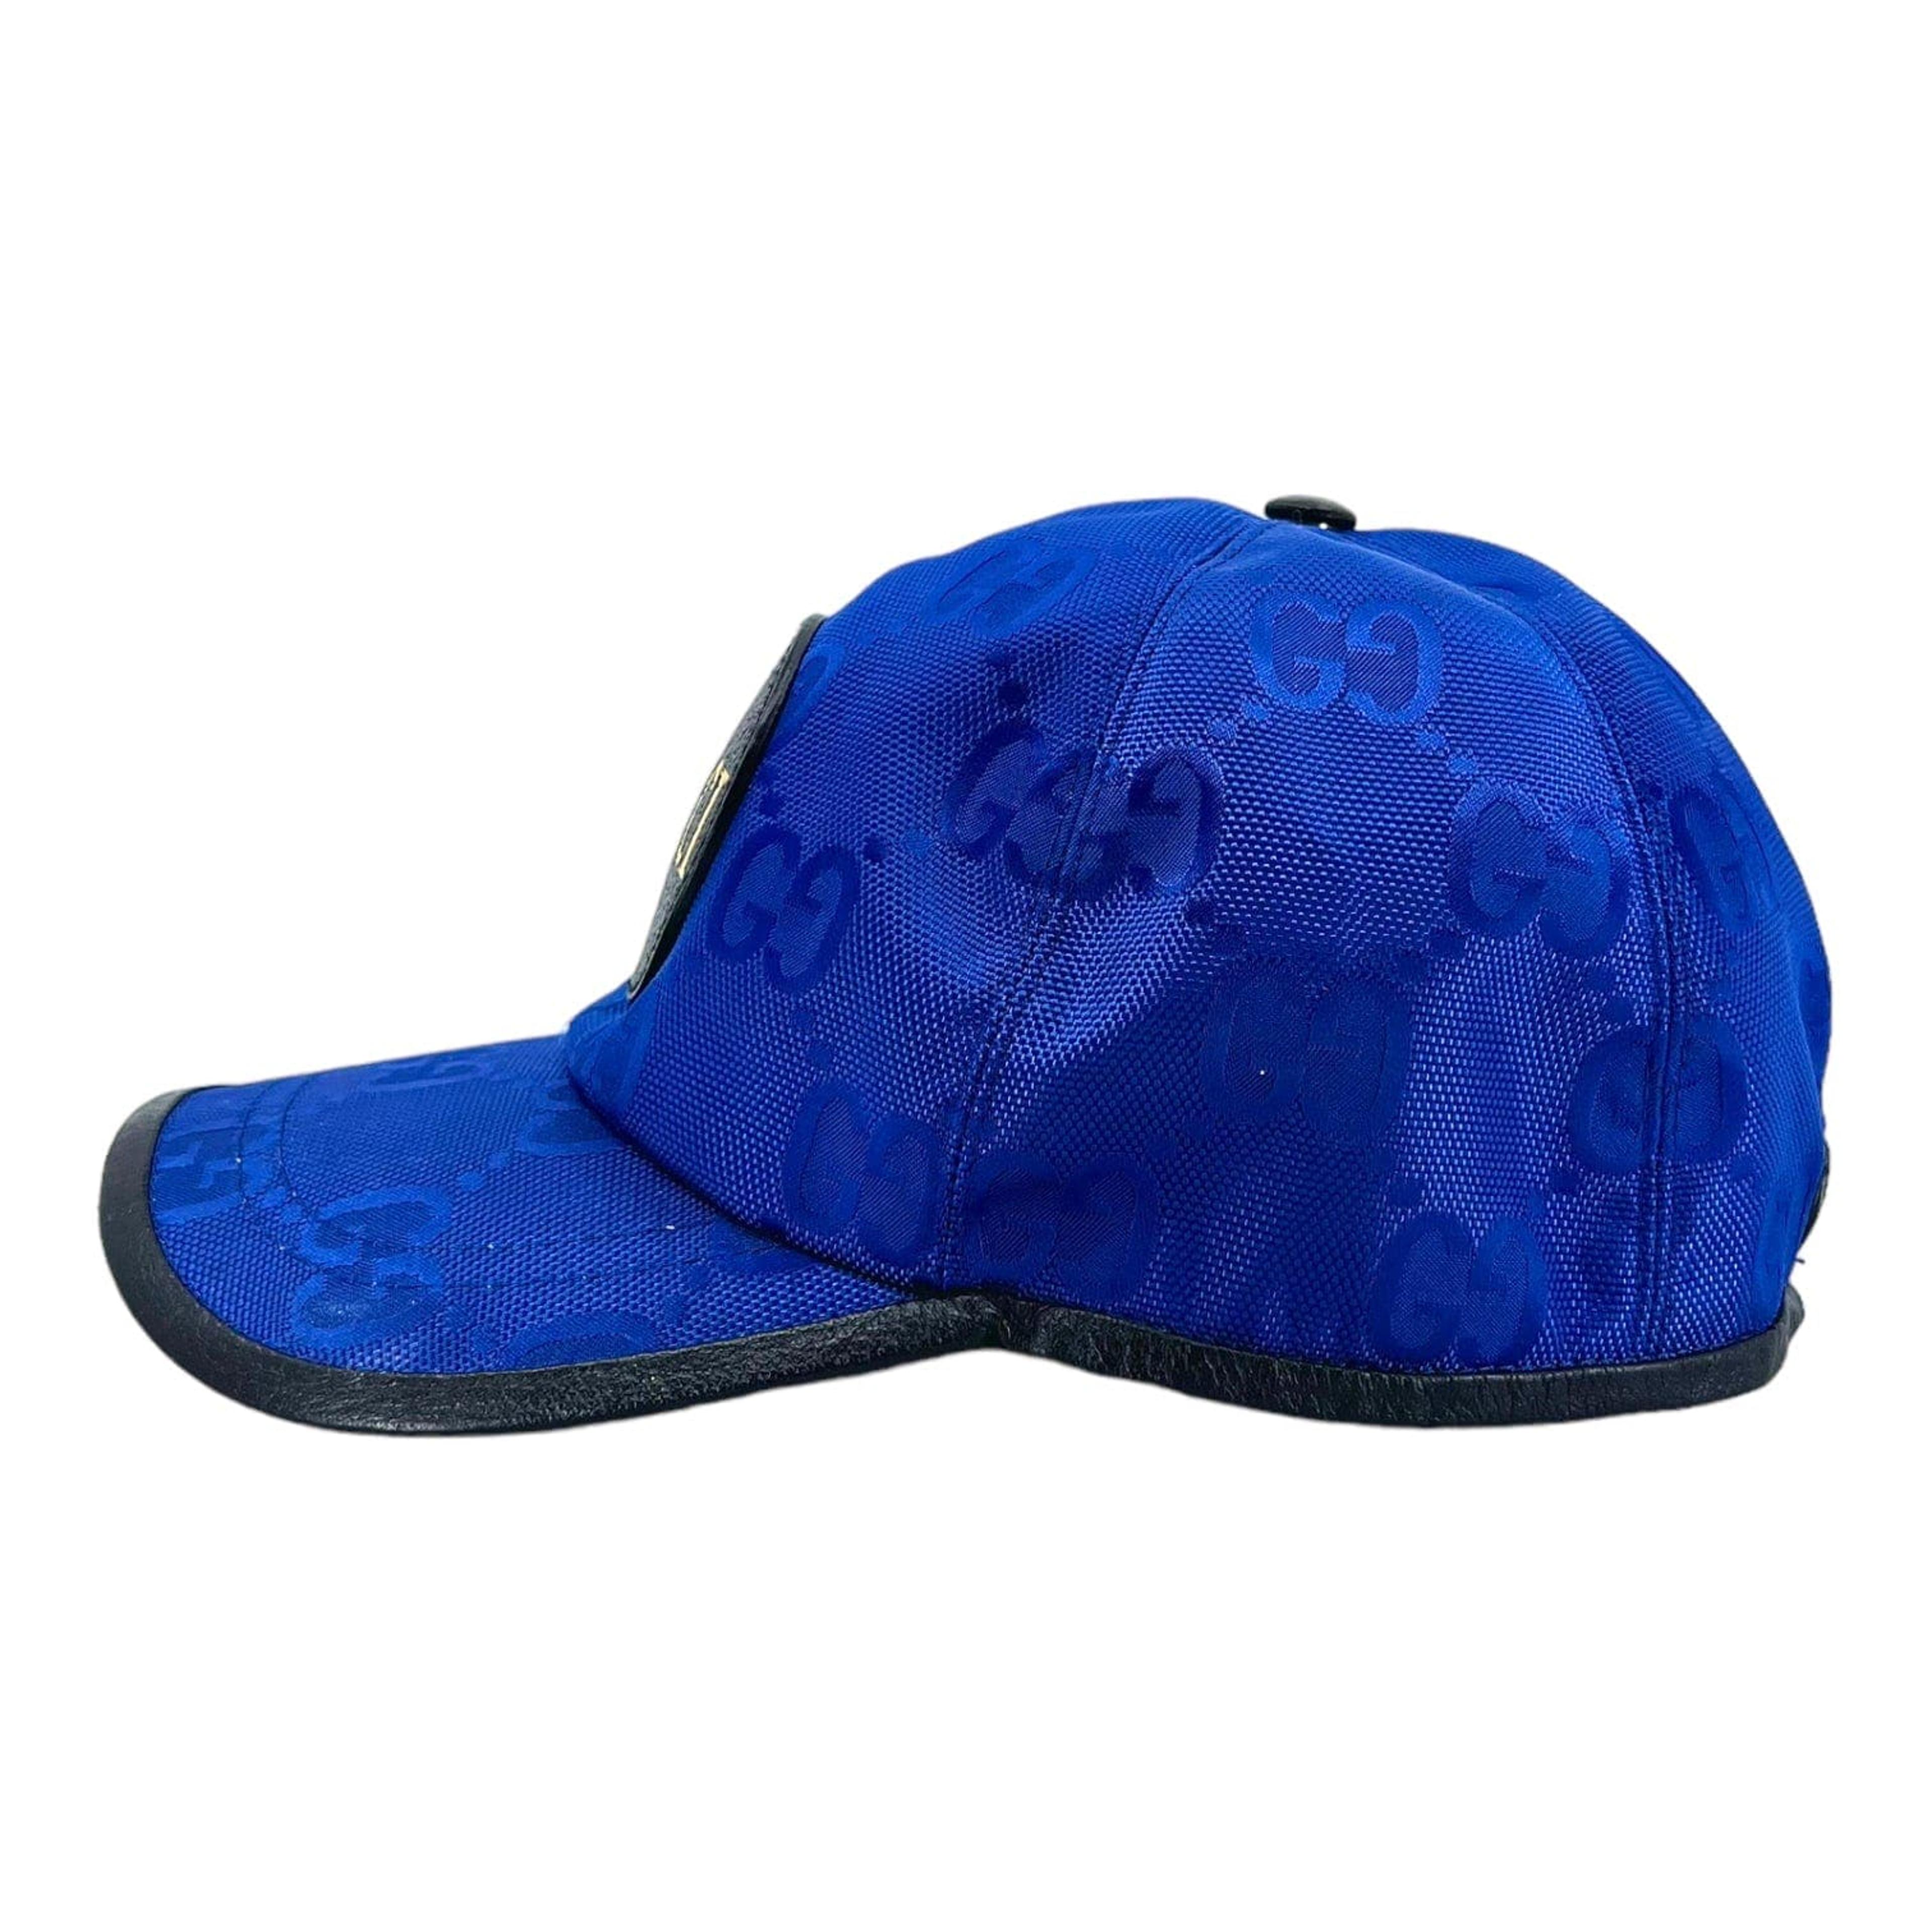 Alternate View 2 of Gucci Off The Grid Baseball Hat Blue Pre-Owned